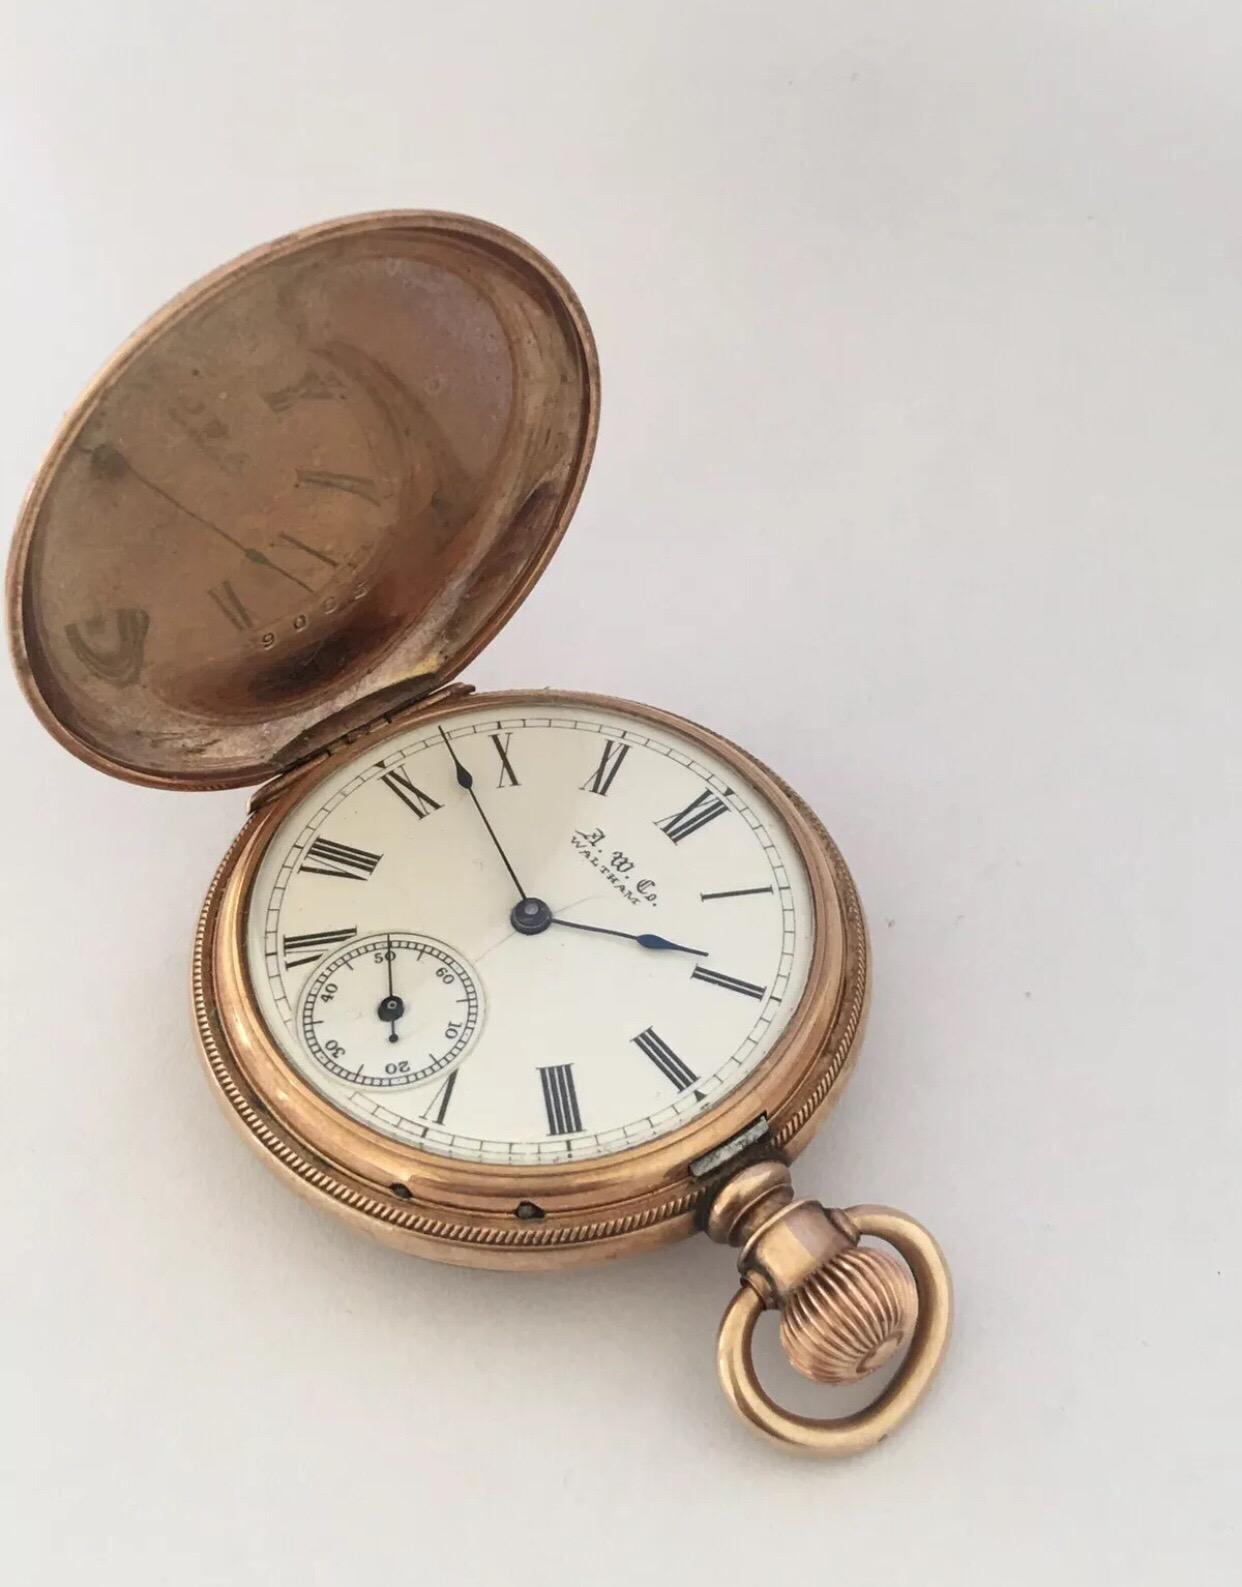 Antique 14K Gold American Watch Co. Waltham Full Hunter Ladies Size Pocket Watch.


This Beautiful 41mm diameter full hunter and engine turned decorative cased pocket watch is in good working condition and it is running well. Visible signs of ageing